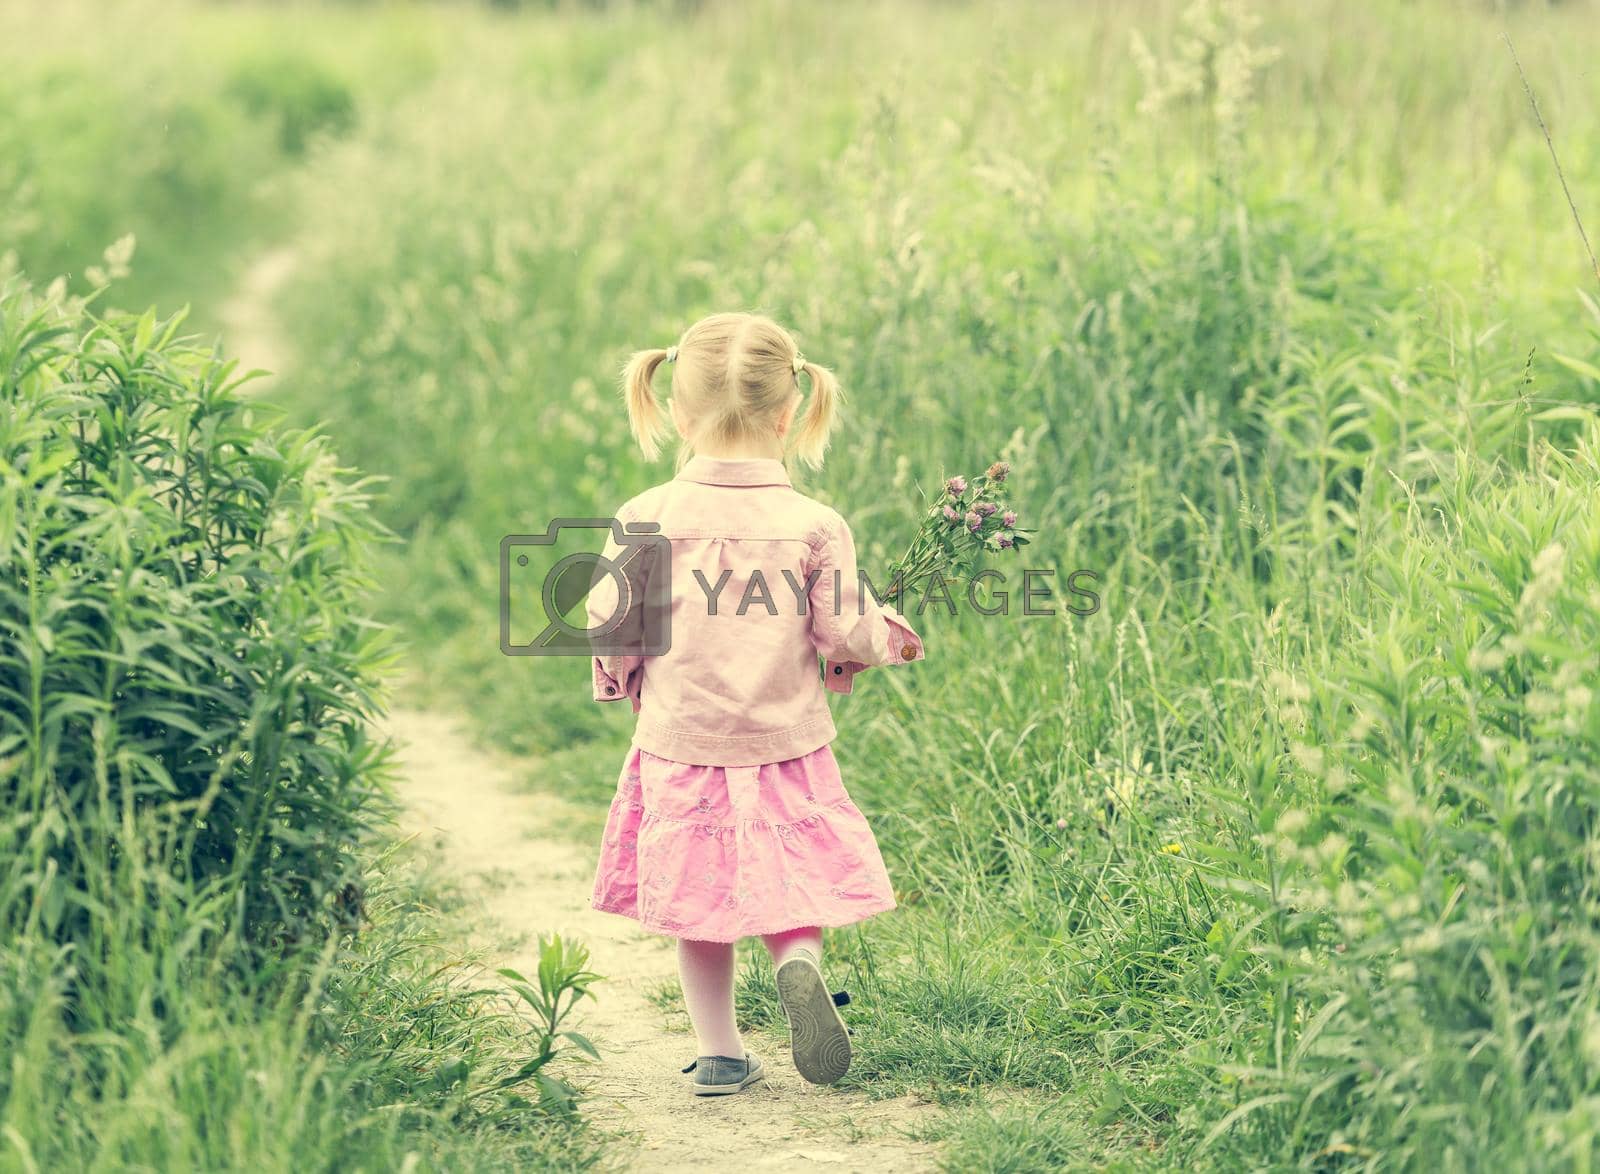 Royalty free image of Cute little girl on the meadow by tan4ikk1